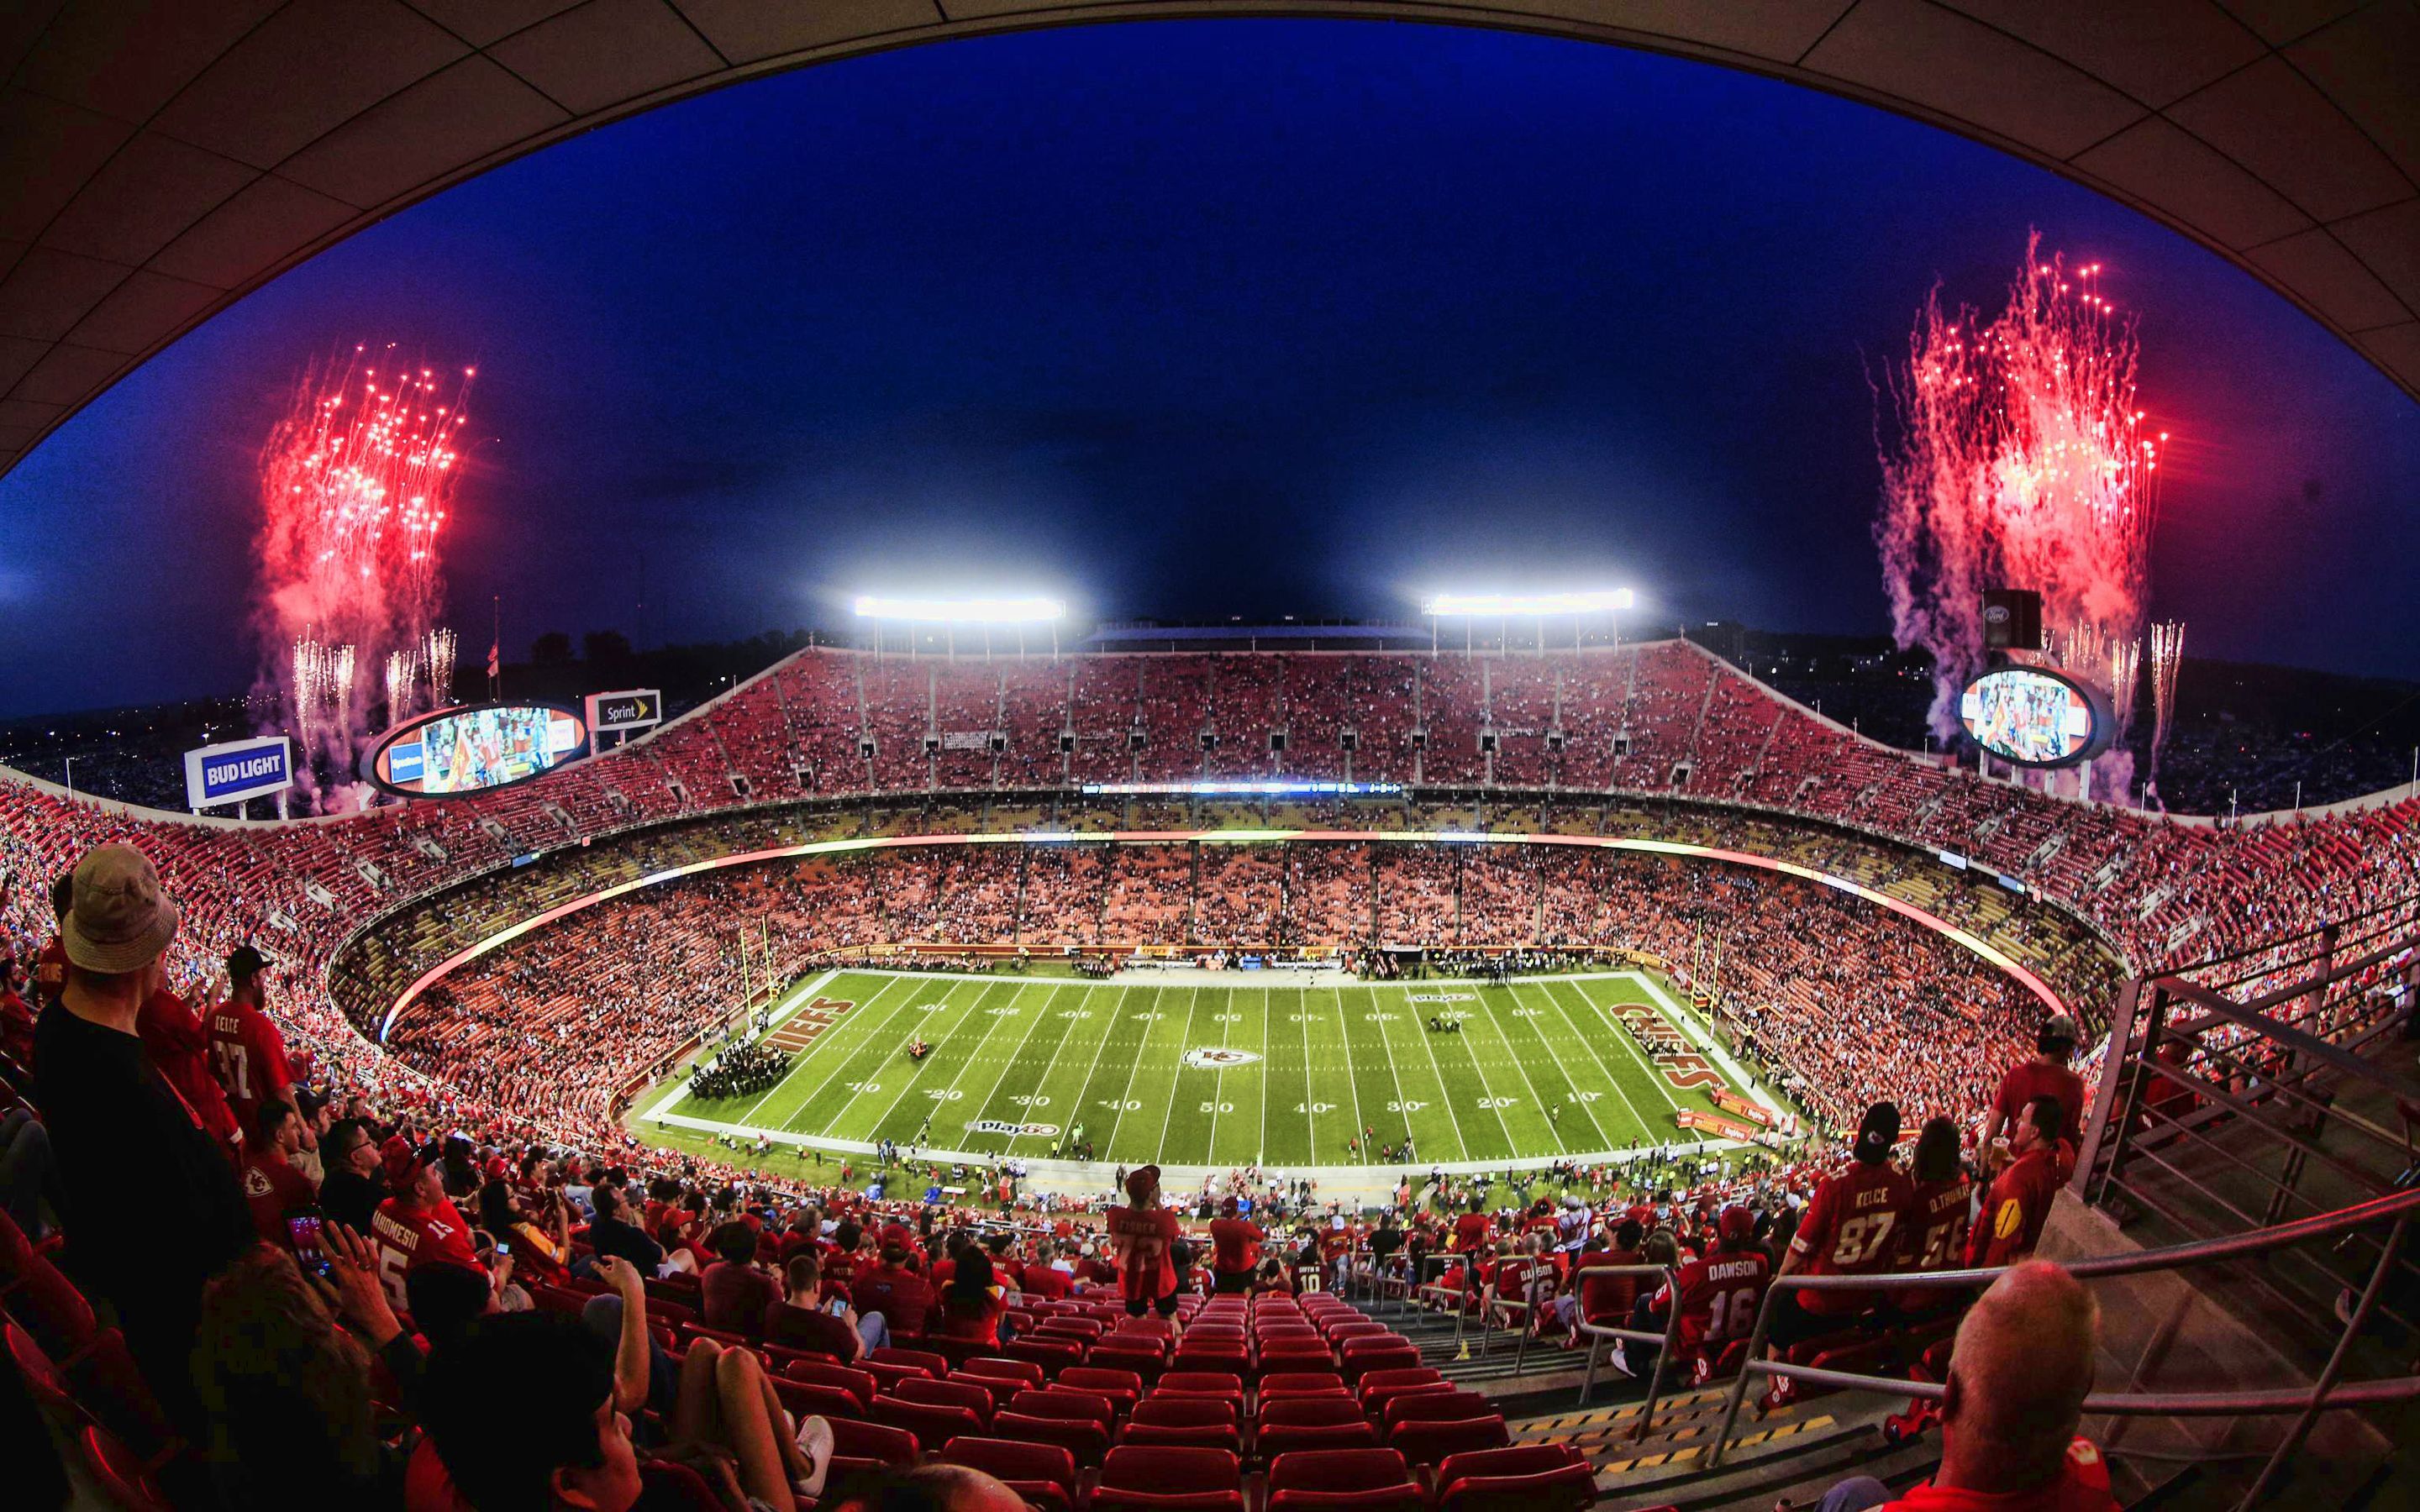 Download wallpaper Arrowhead Stadium, NFL, Kansas City Chiefs Stadium, Kansas City, Missouri, Kansas City Chiefs, american football, football stadium, National Football League, USA for desktop with resolution 2880x1800. High Quality HD picture